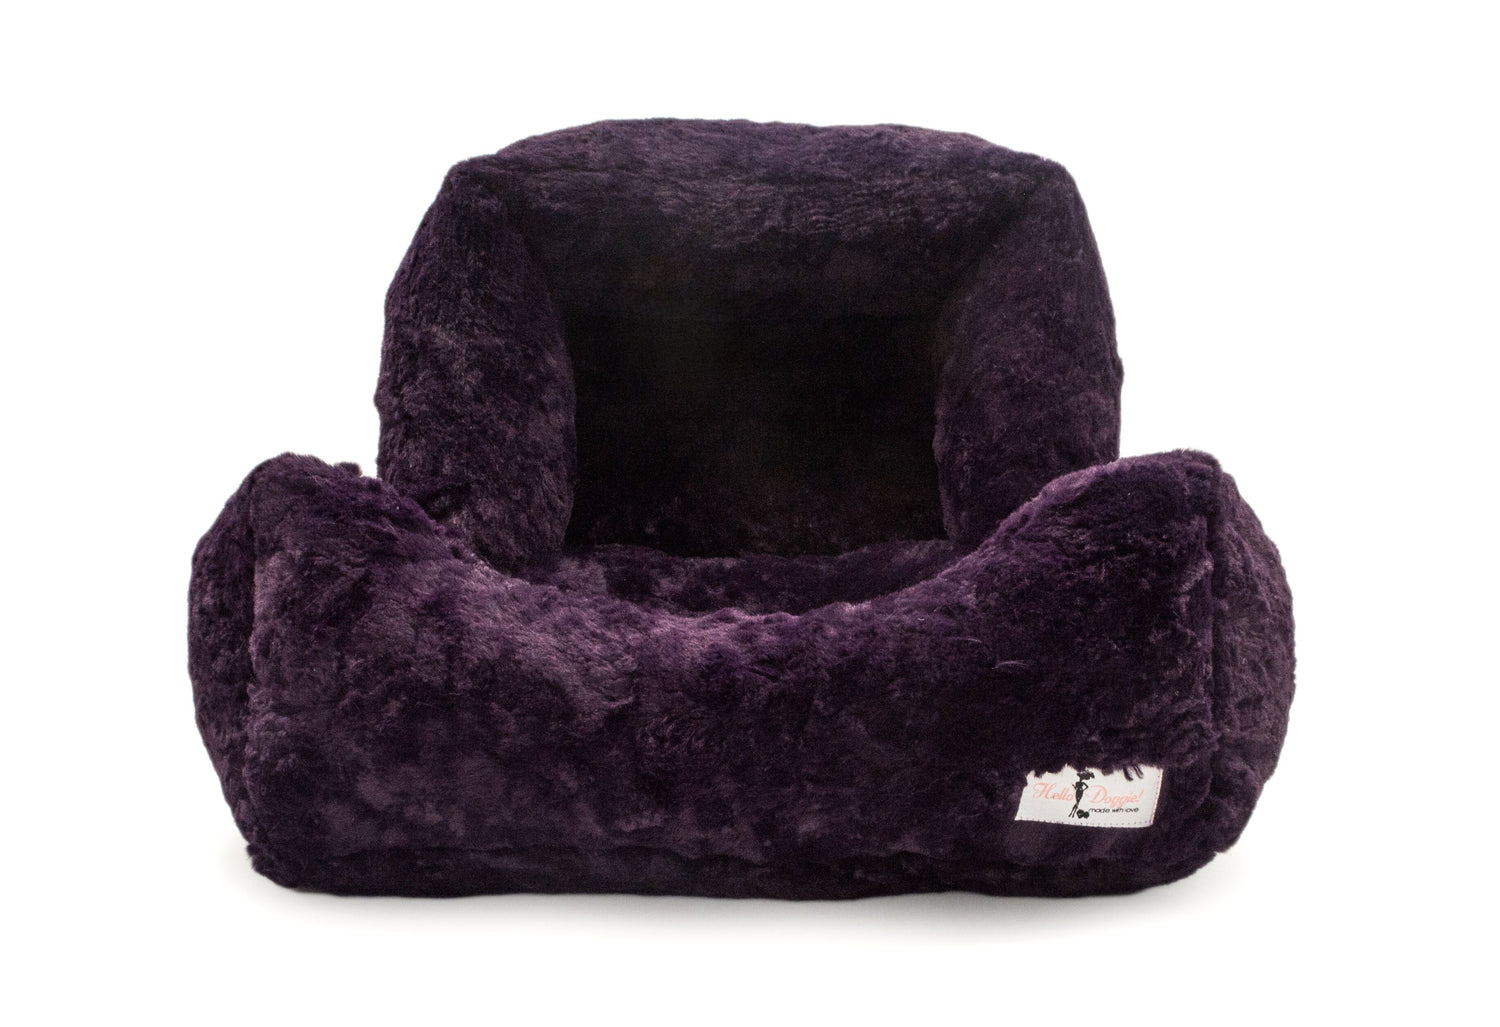 luxury soft dog bed purple color